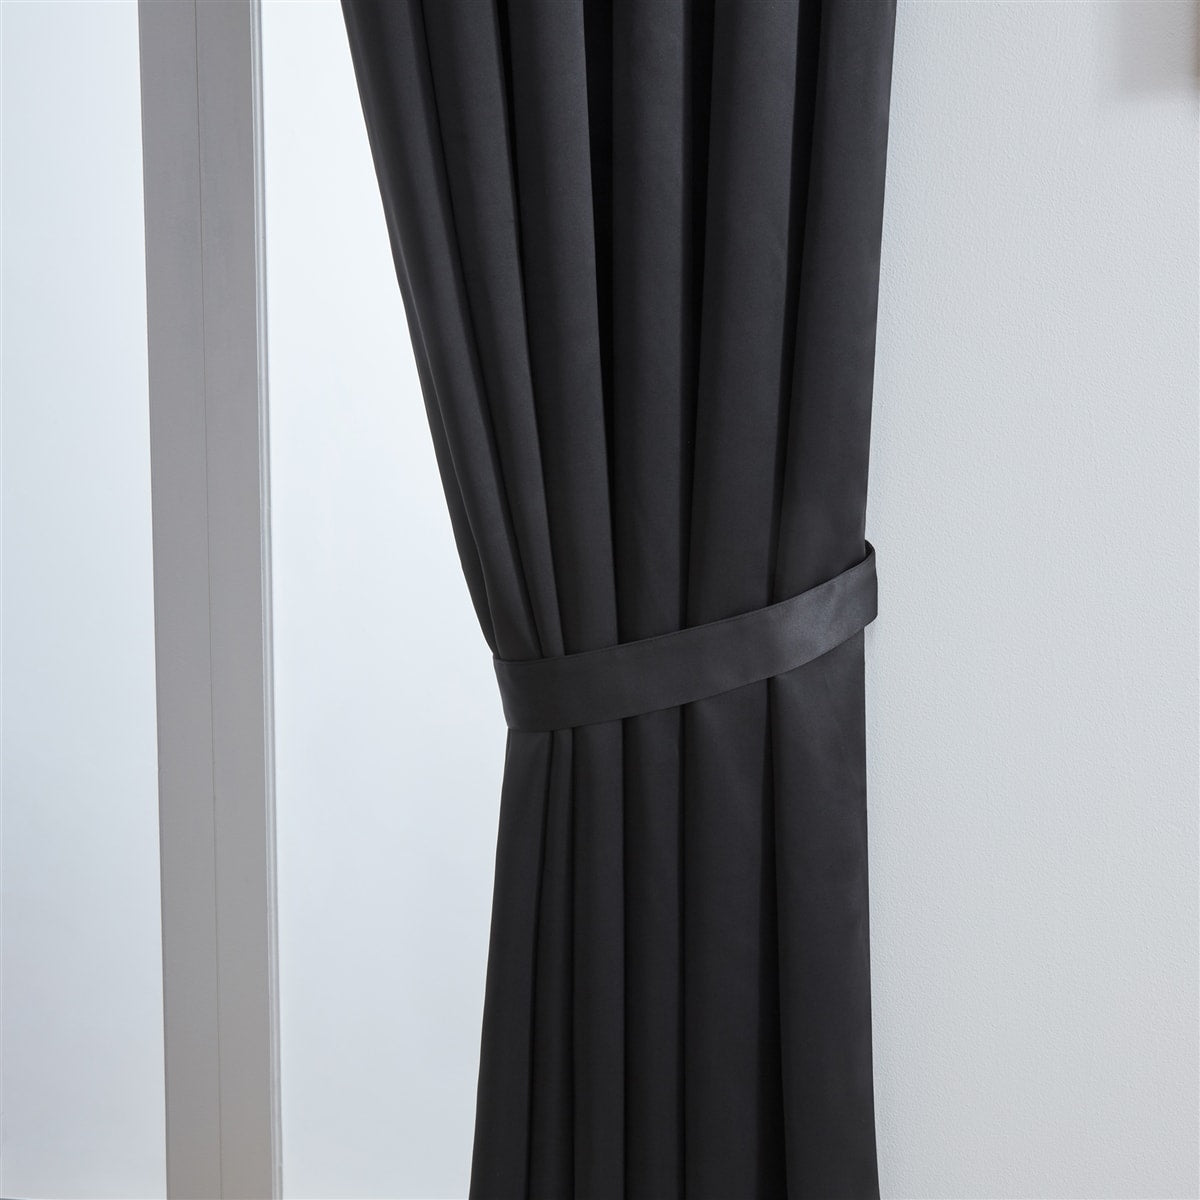 Thermal Blackout Ready Made Eyelet Curtains + Tie Backs (Black)